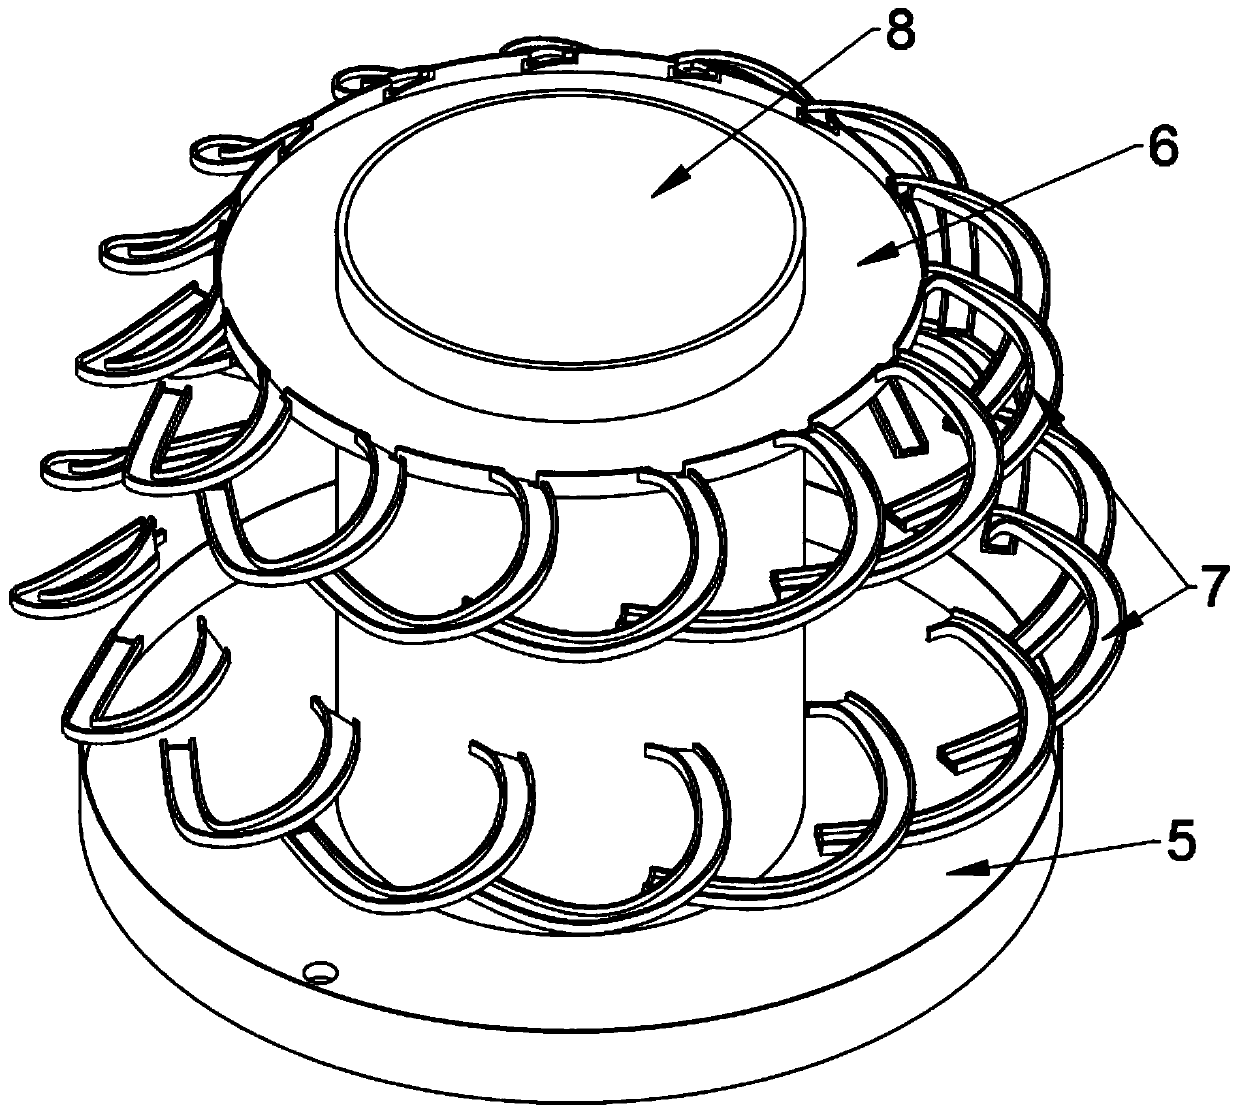 Cooling device based on vehicle injection mold equipment machining